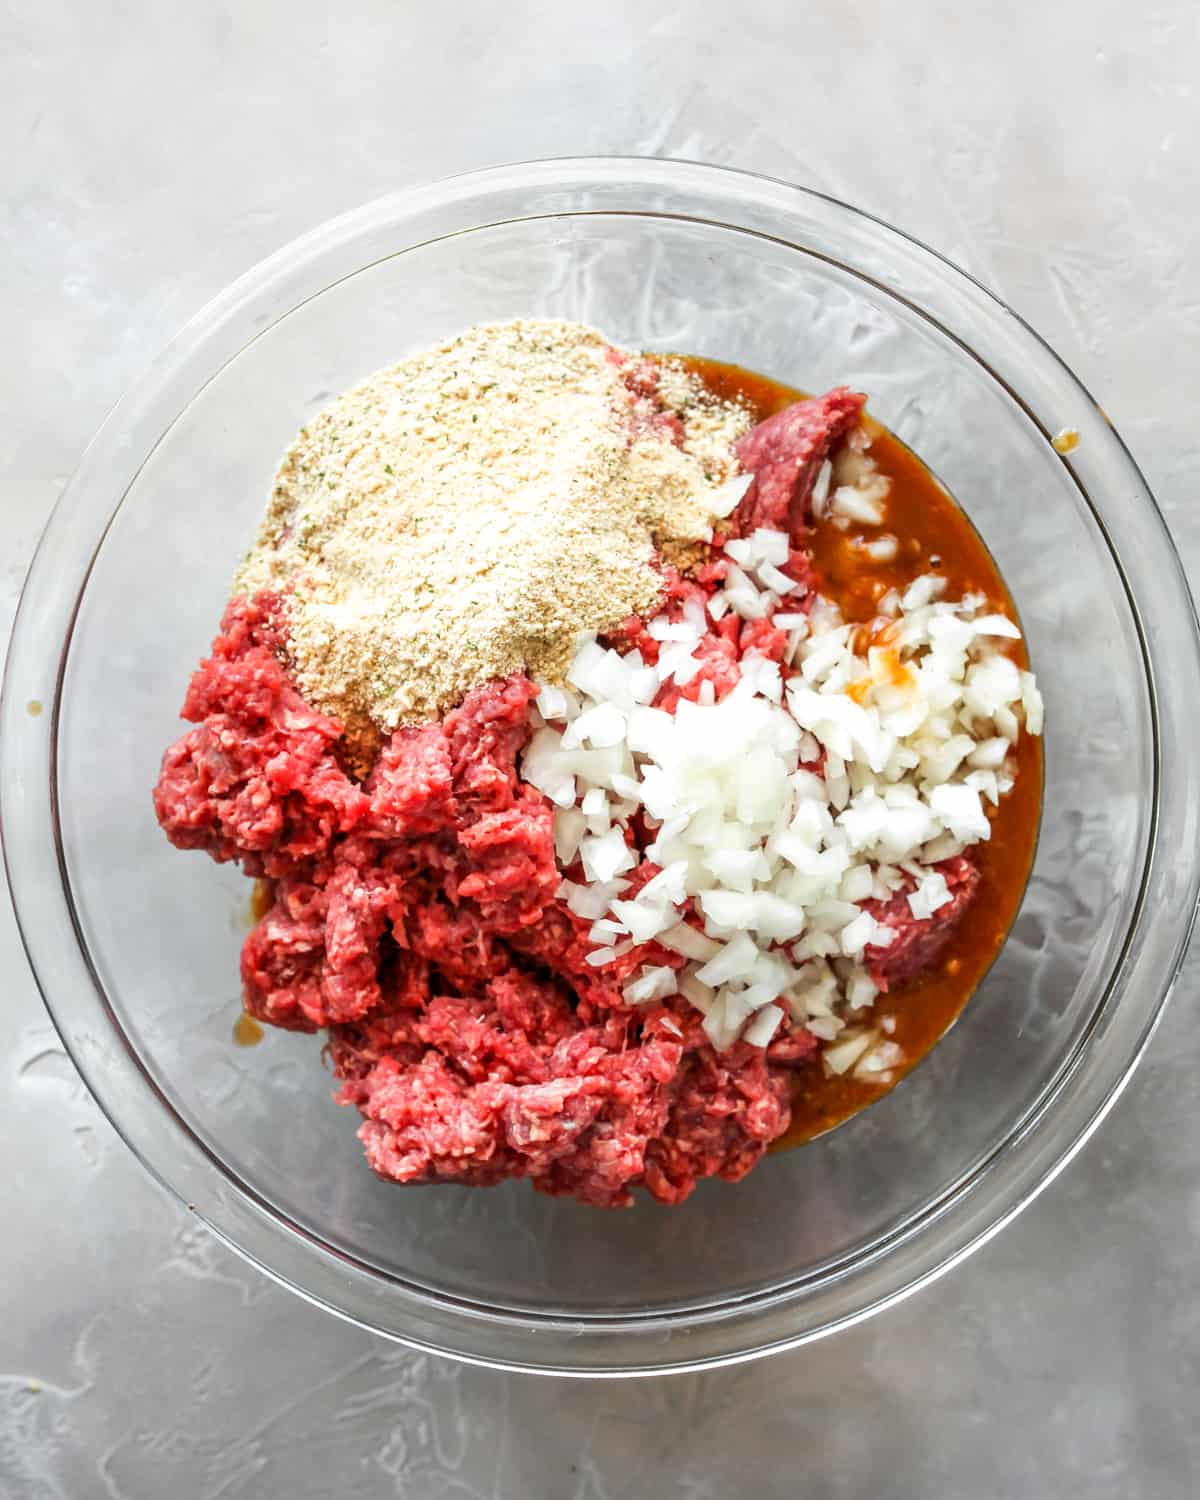 How to Make Meatloaf - adding meat, breadcrumbs, spices and onions to the wet mixture in a glass bowl before mixing